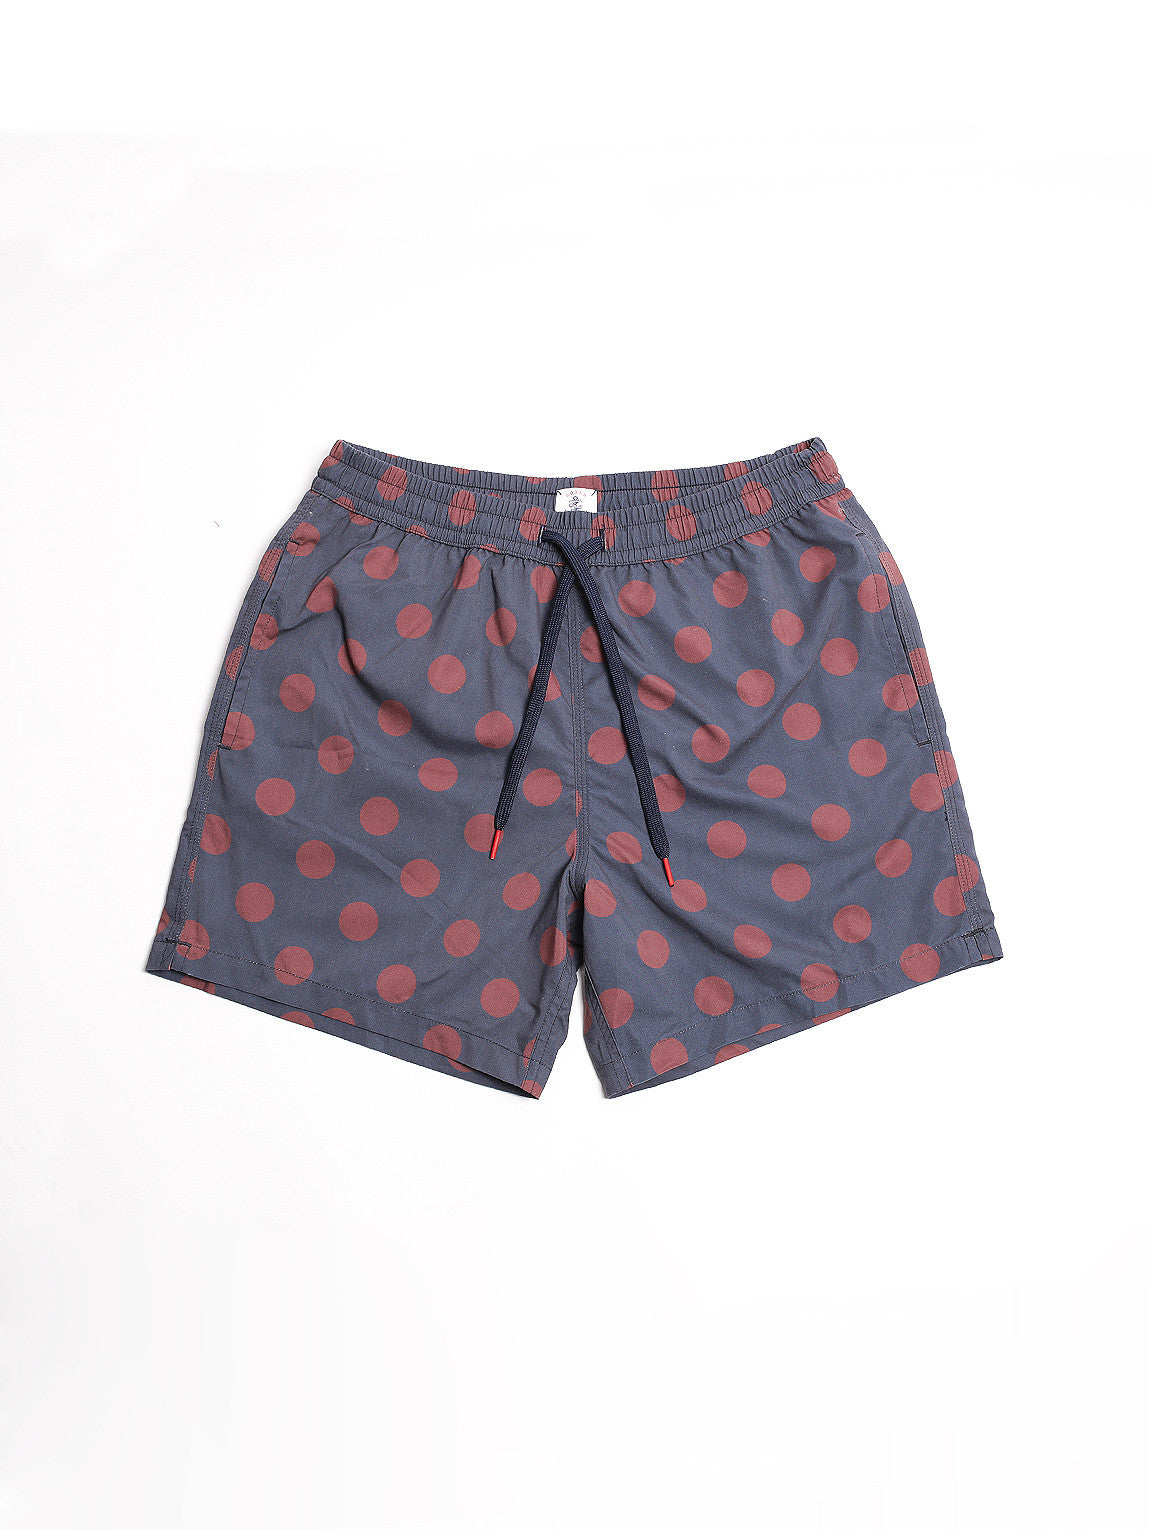 IN THE BOX-BOXER POIS Blue Navy/Burgundy-TRYME Shop